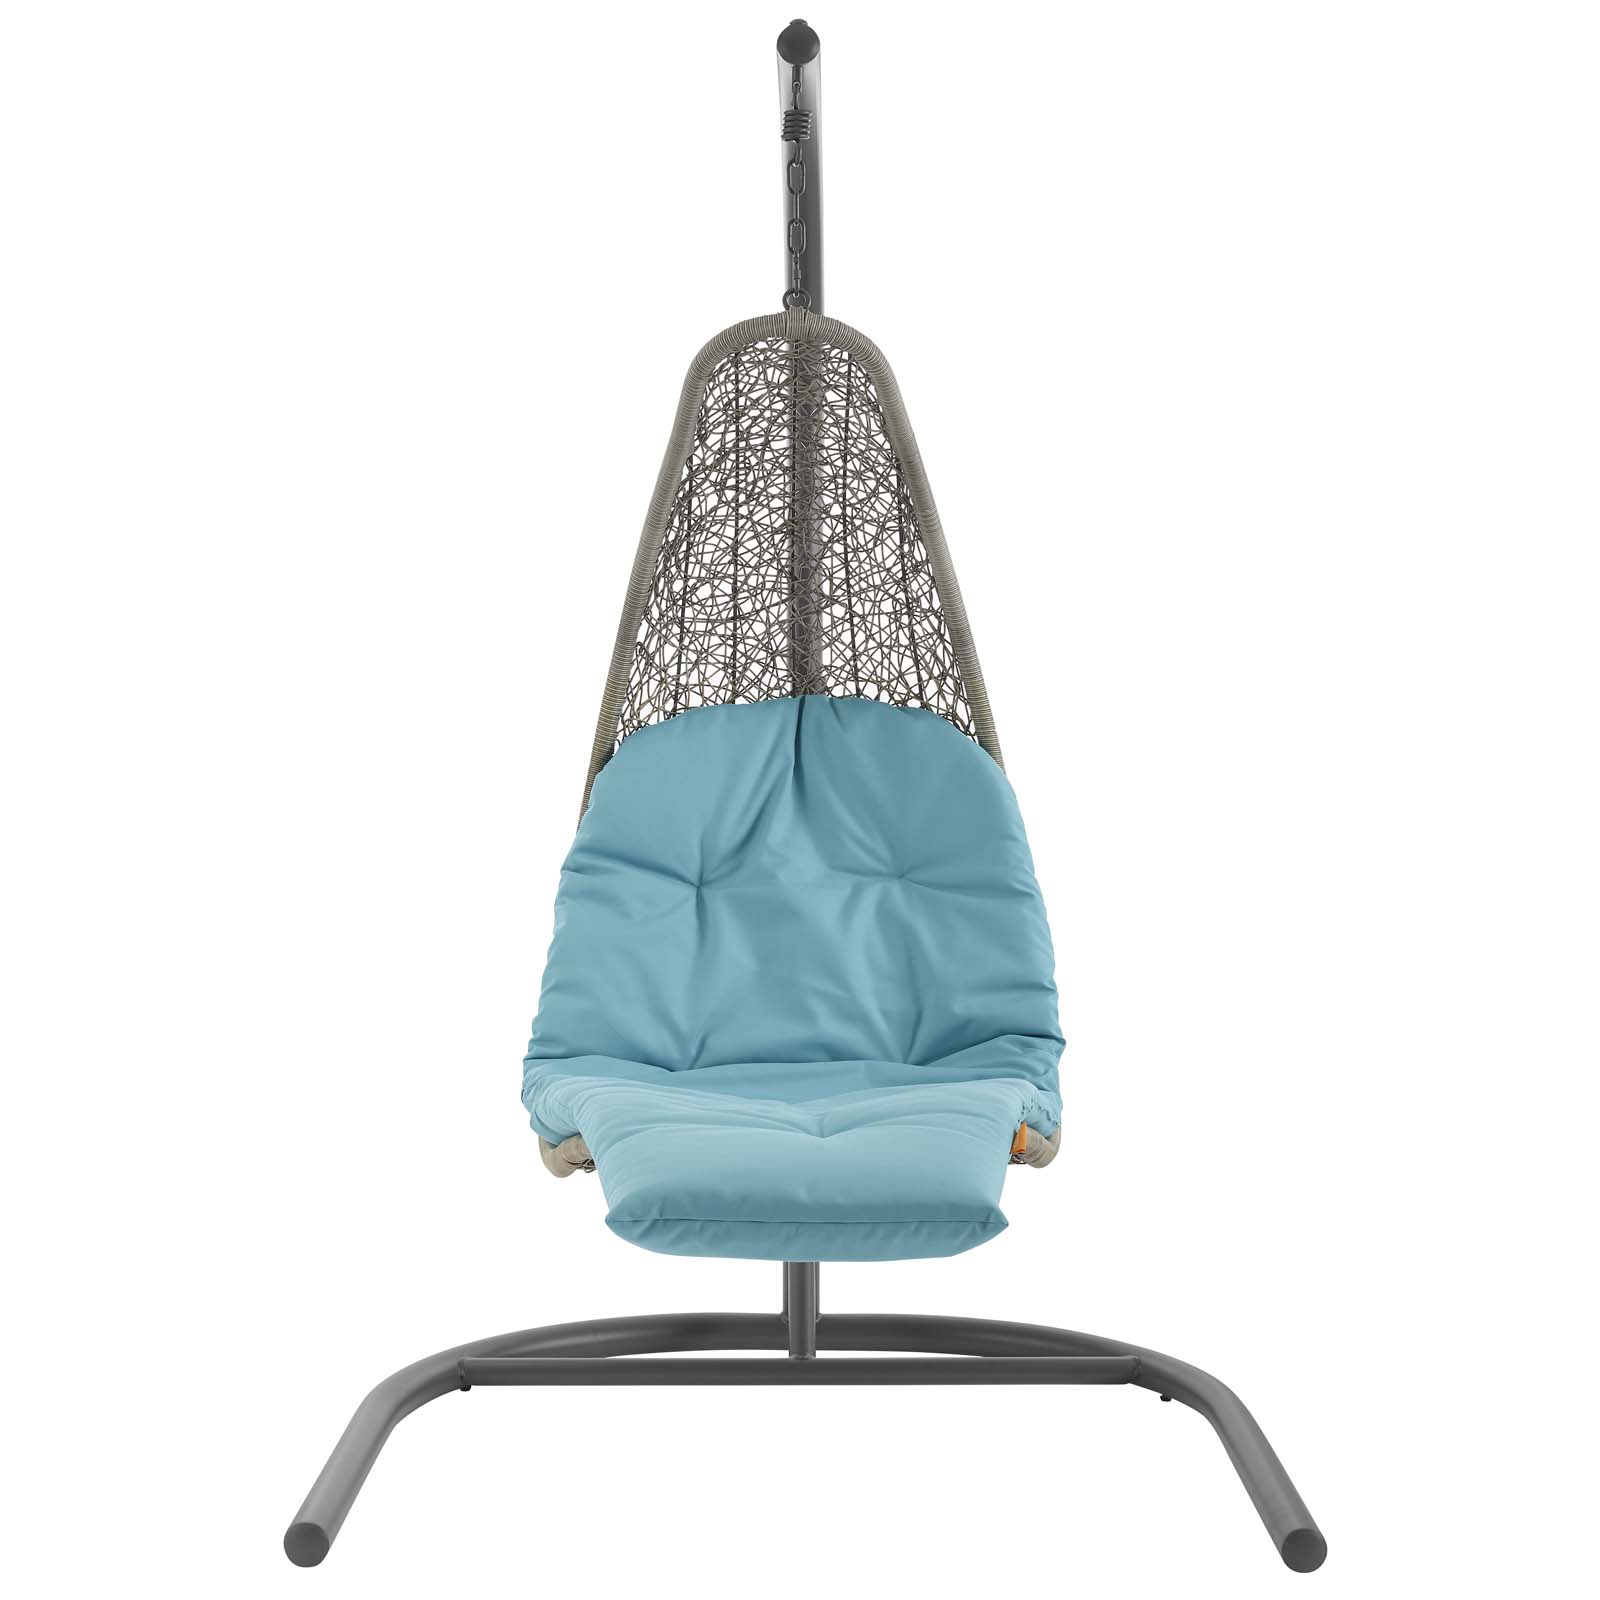 Modway Landscape Outdoor Patio Hanging Chaise Lounge Swing Chair, Multiple Colors - image 2 of 6